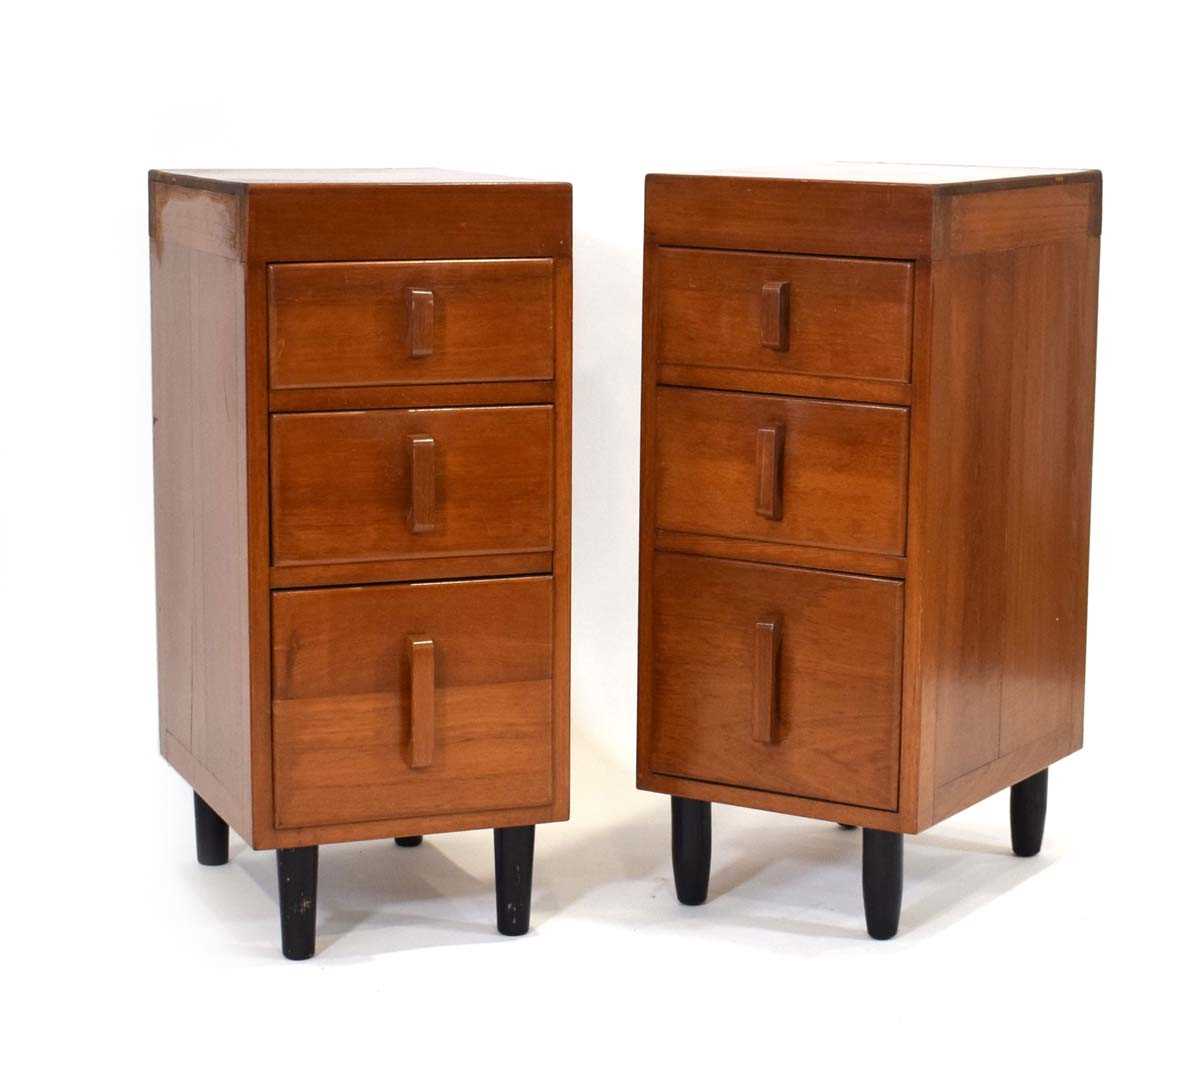 A pair of 1950/60's solid teak three-drawer side cabinets with cardboard drawer liners and chunky